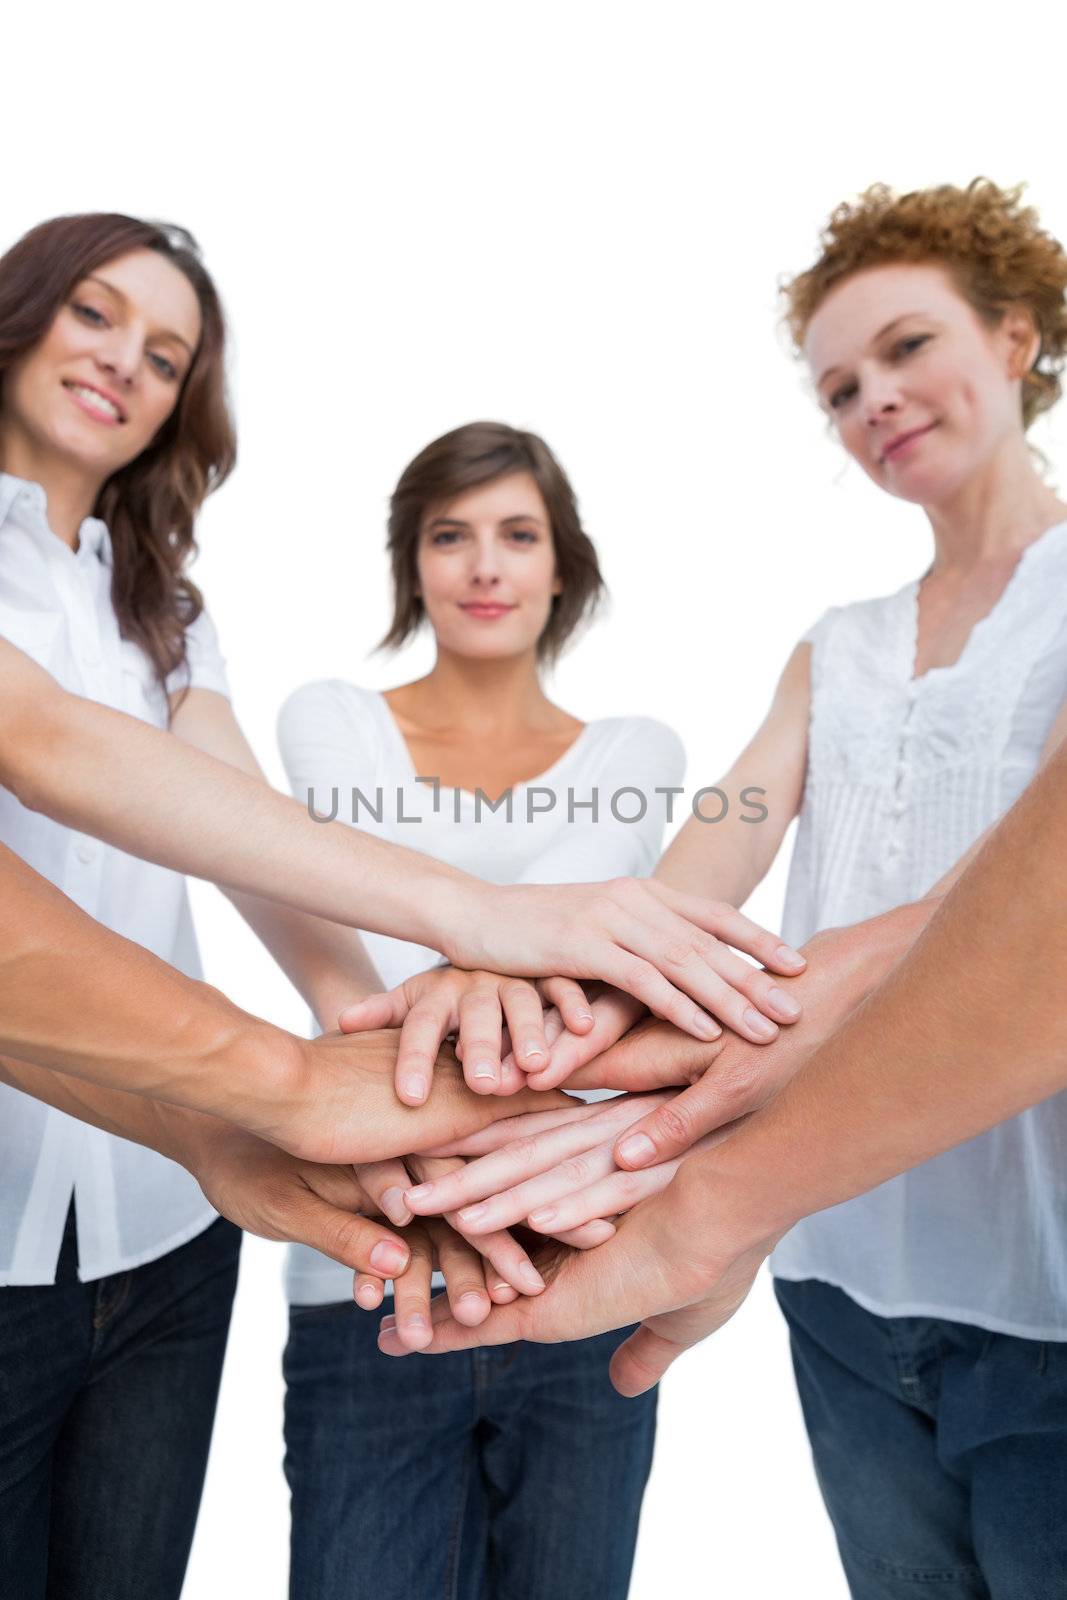 Peaceful women joining hands in a circle on white background